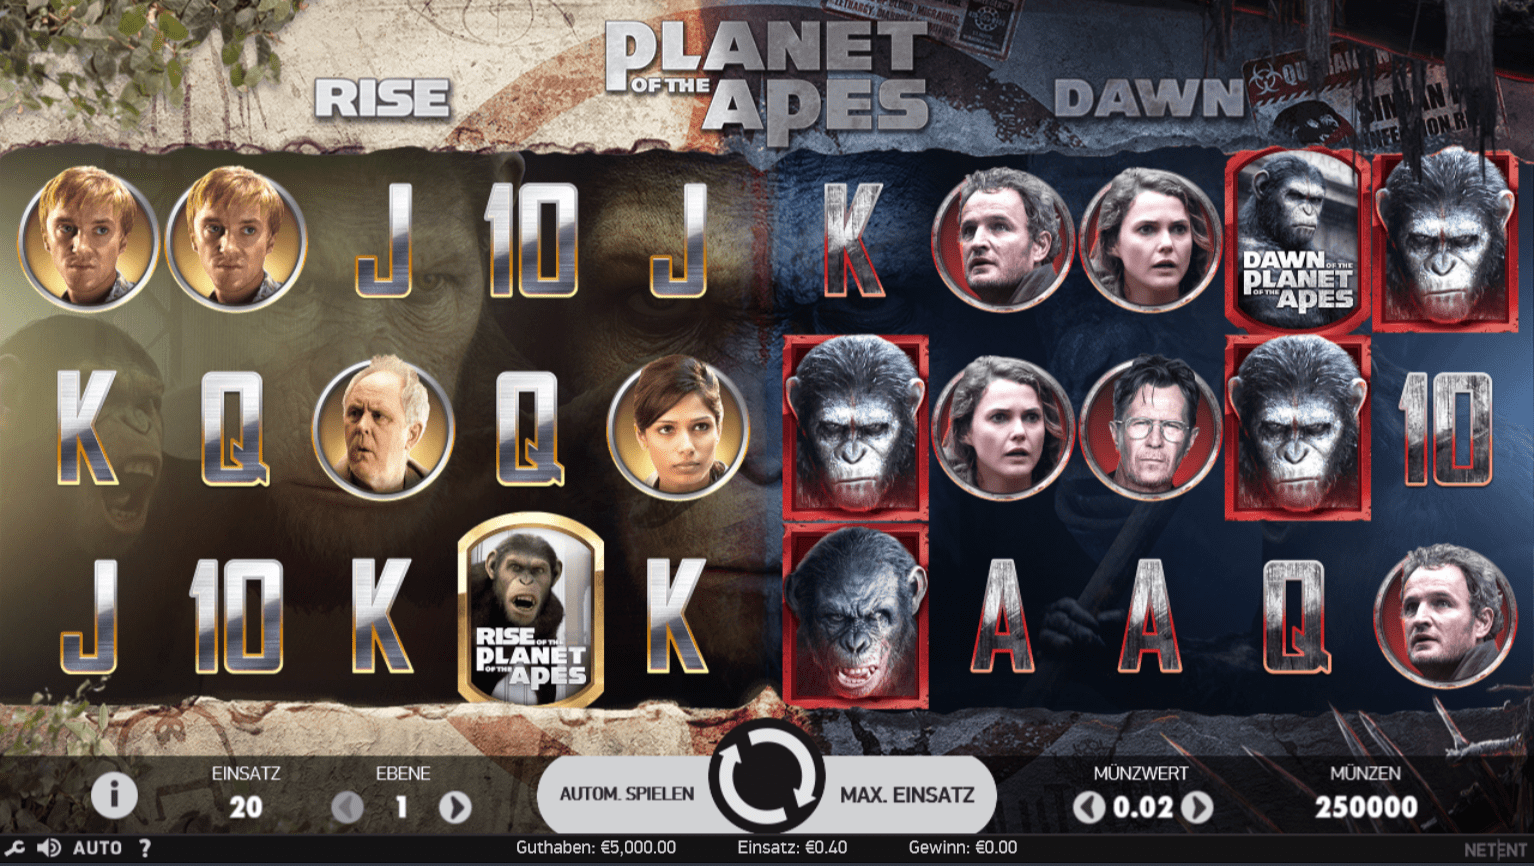 Planet of the Apes kostenlos spielebn - Planet of the Apes